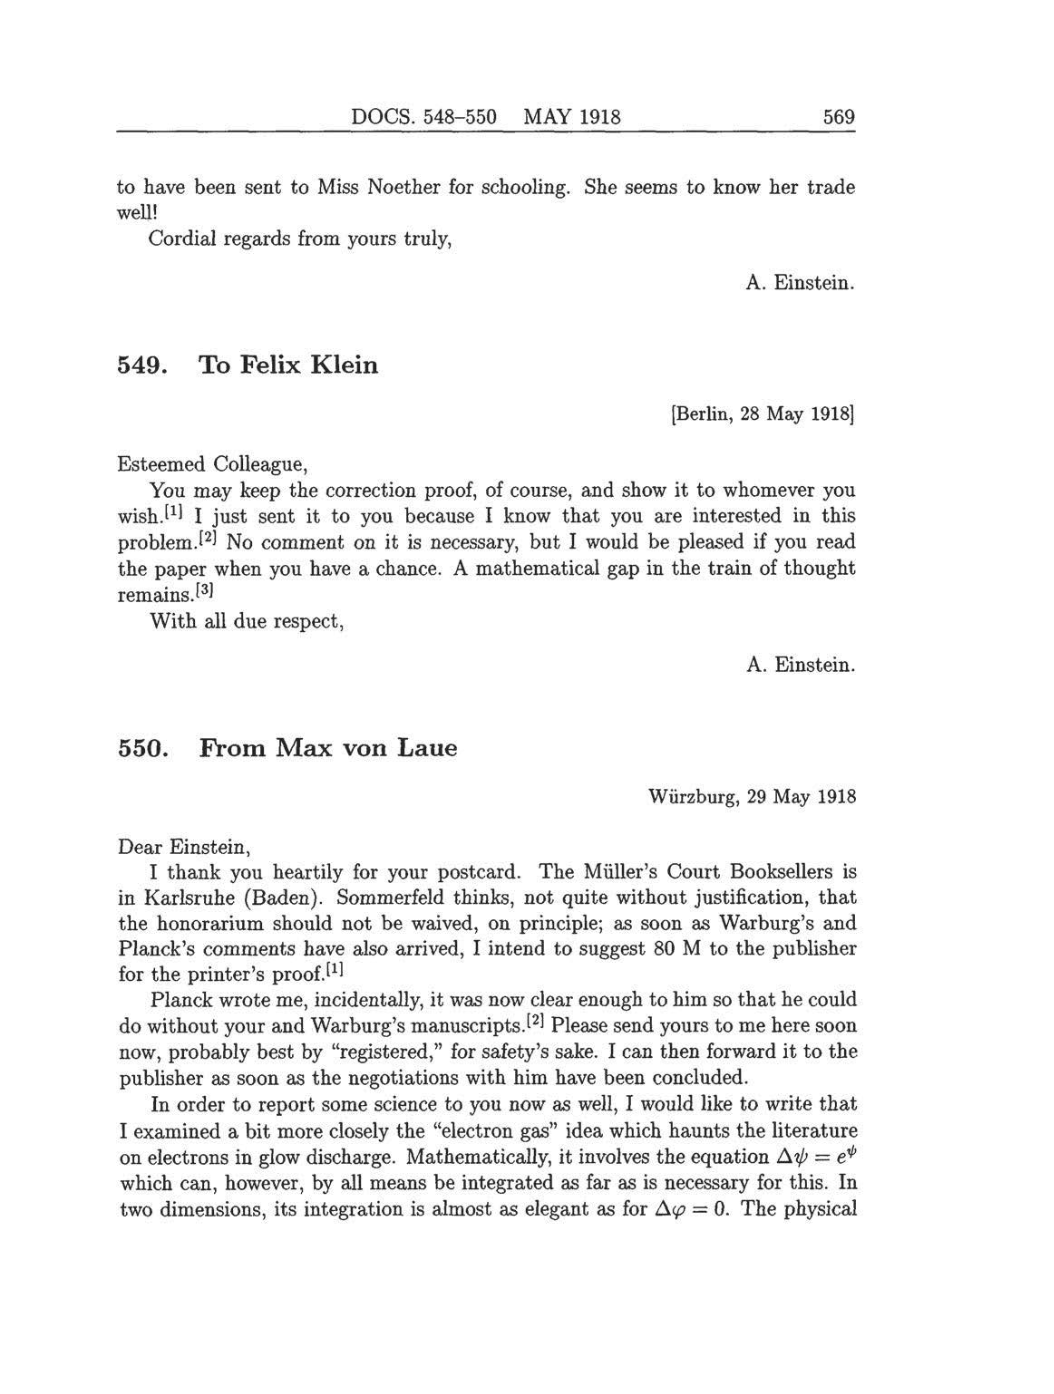 Volume 8: The Berlin Years: Correspondence, 1914-1918 (English translation supplement) page 569